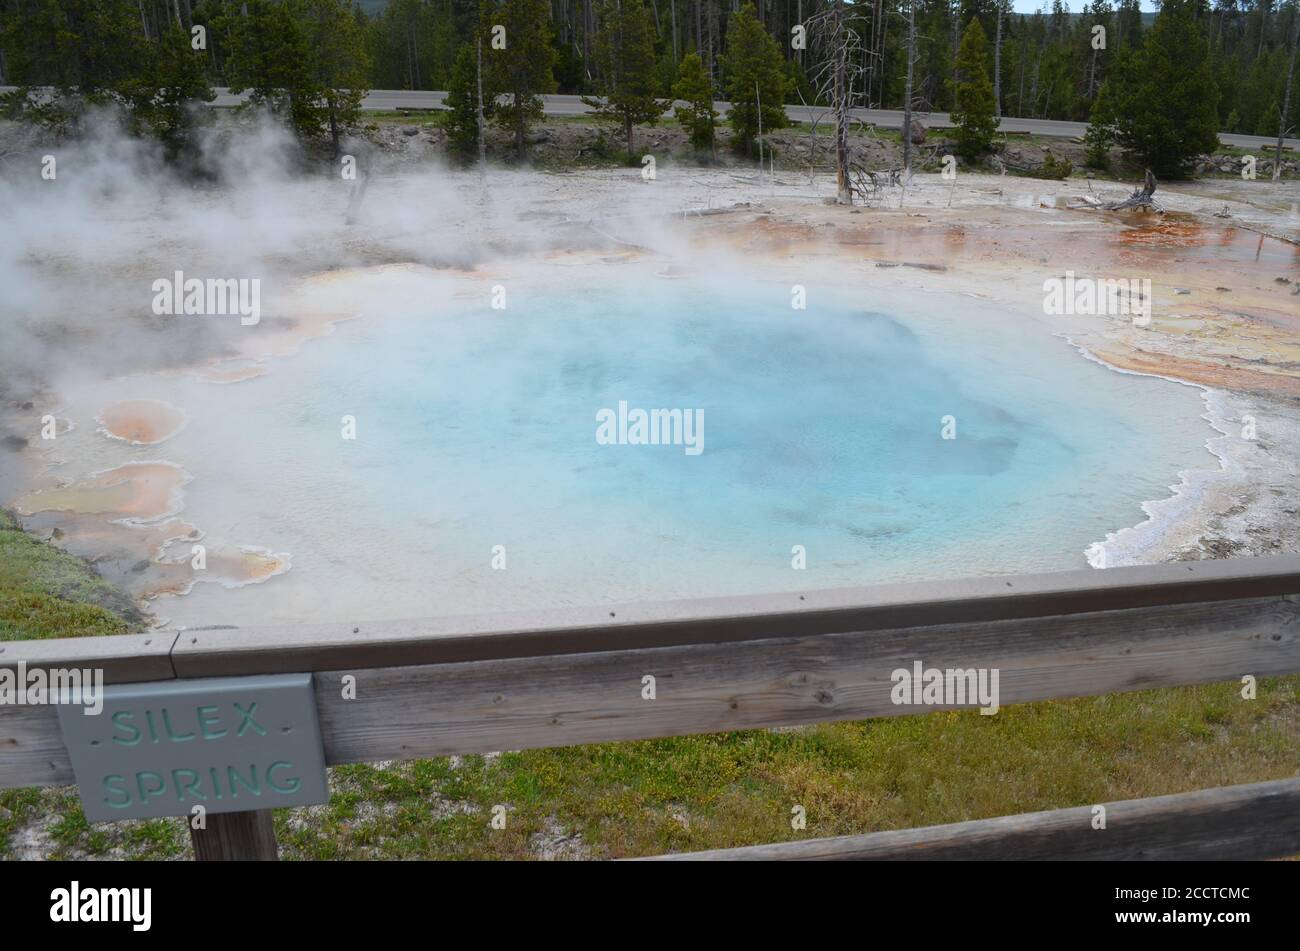 YELLOWSTONE NATIONAL PARK, WYOMING - JUNE 9, 2017: Silex Spring of the Fountain Group in the Lower Geyser Basin Stock Photo